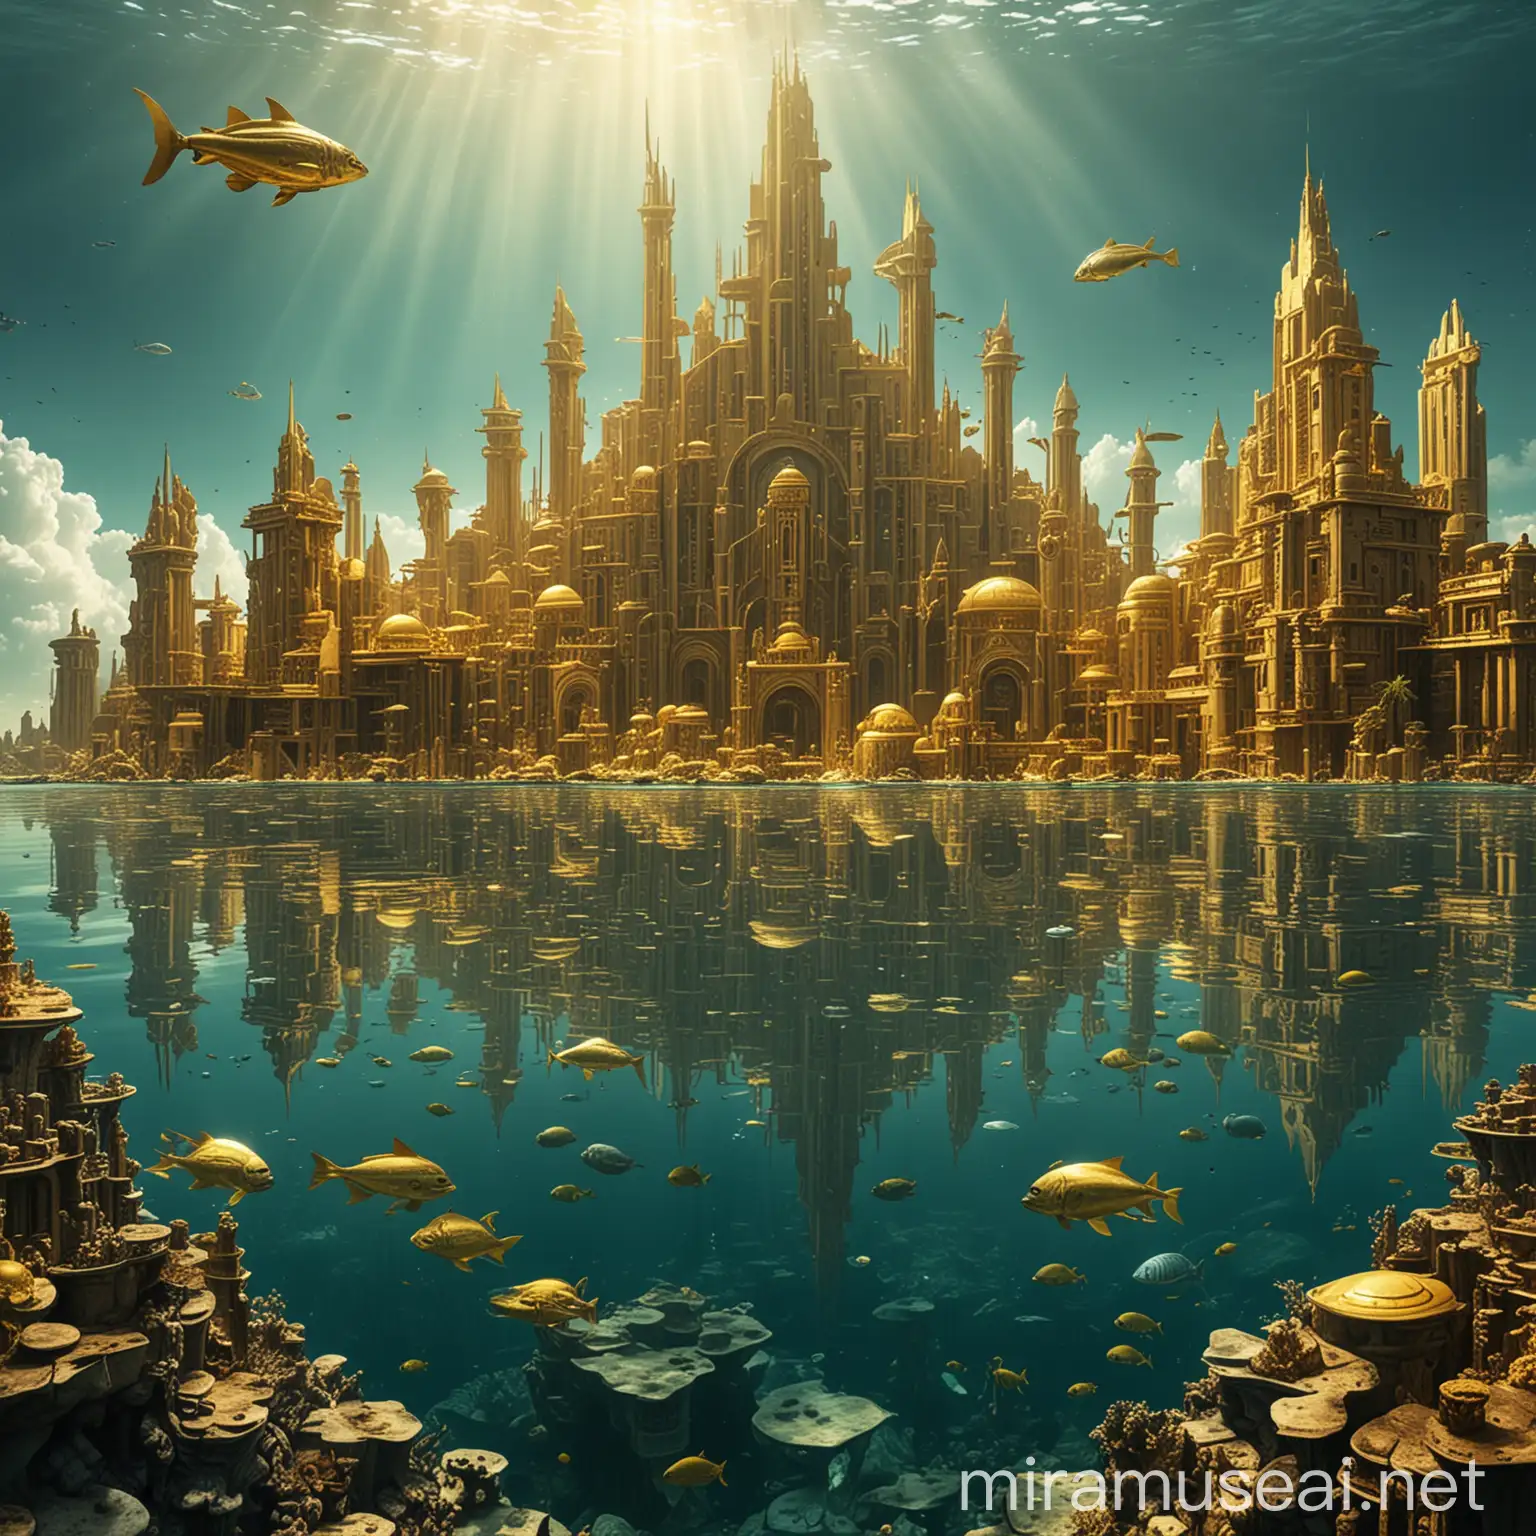 Golden Underwater City of Atlantis Futuristic YellowGold Buildings in Detailed Submerged Environment